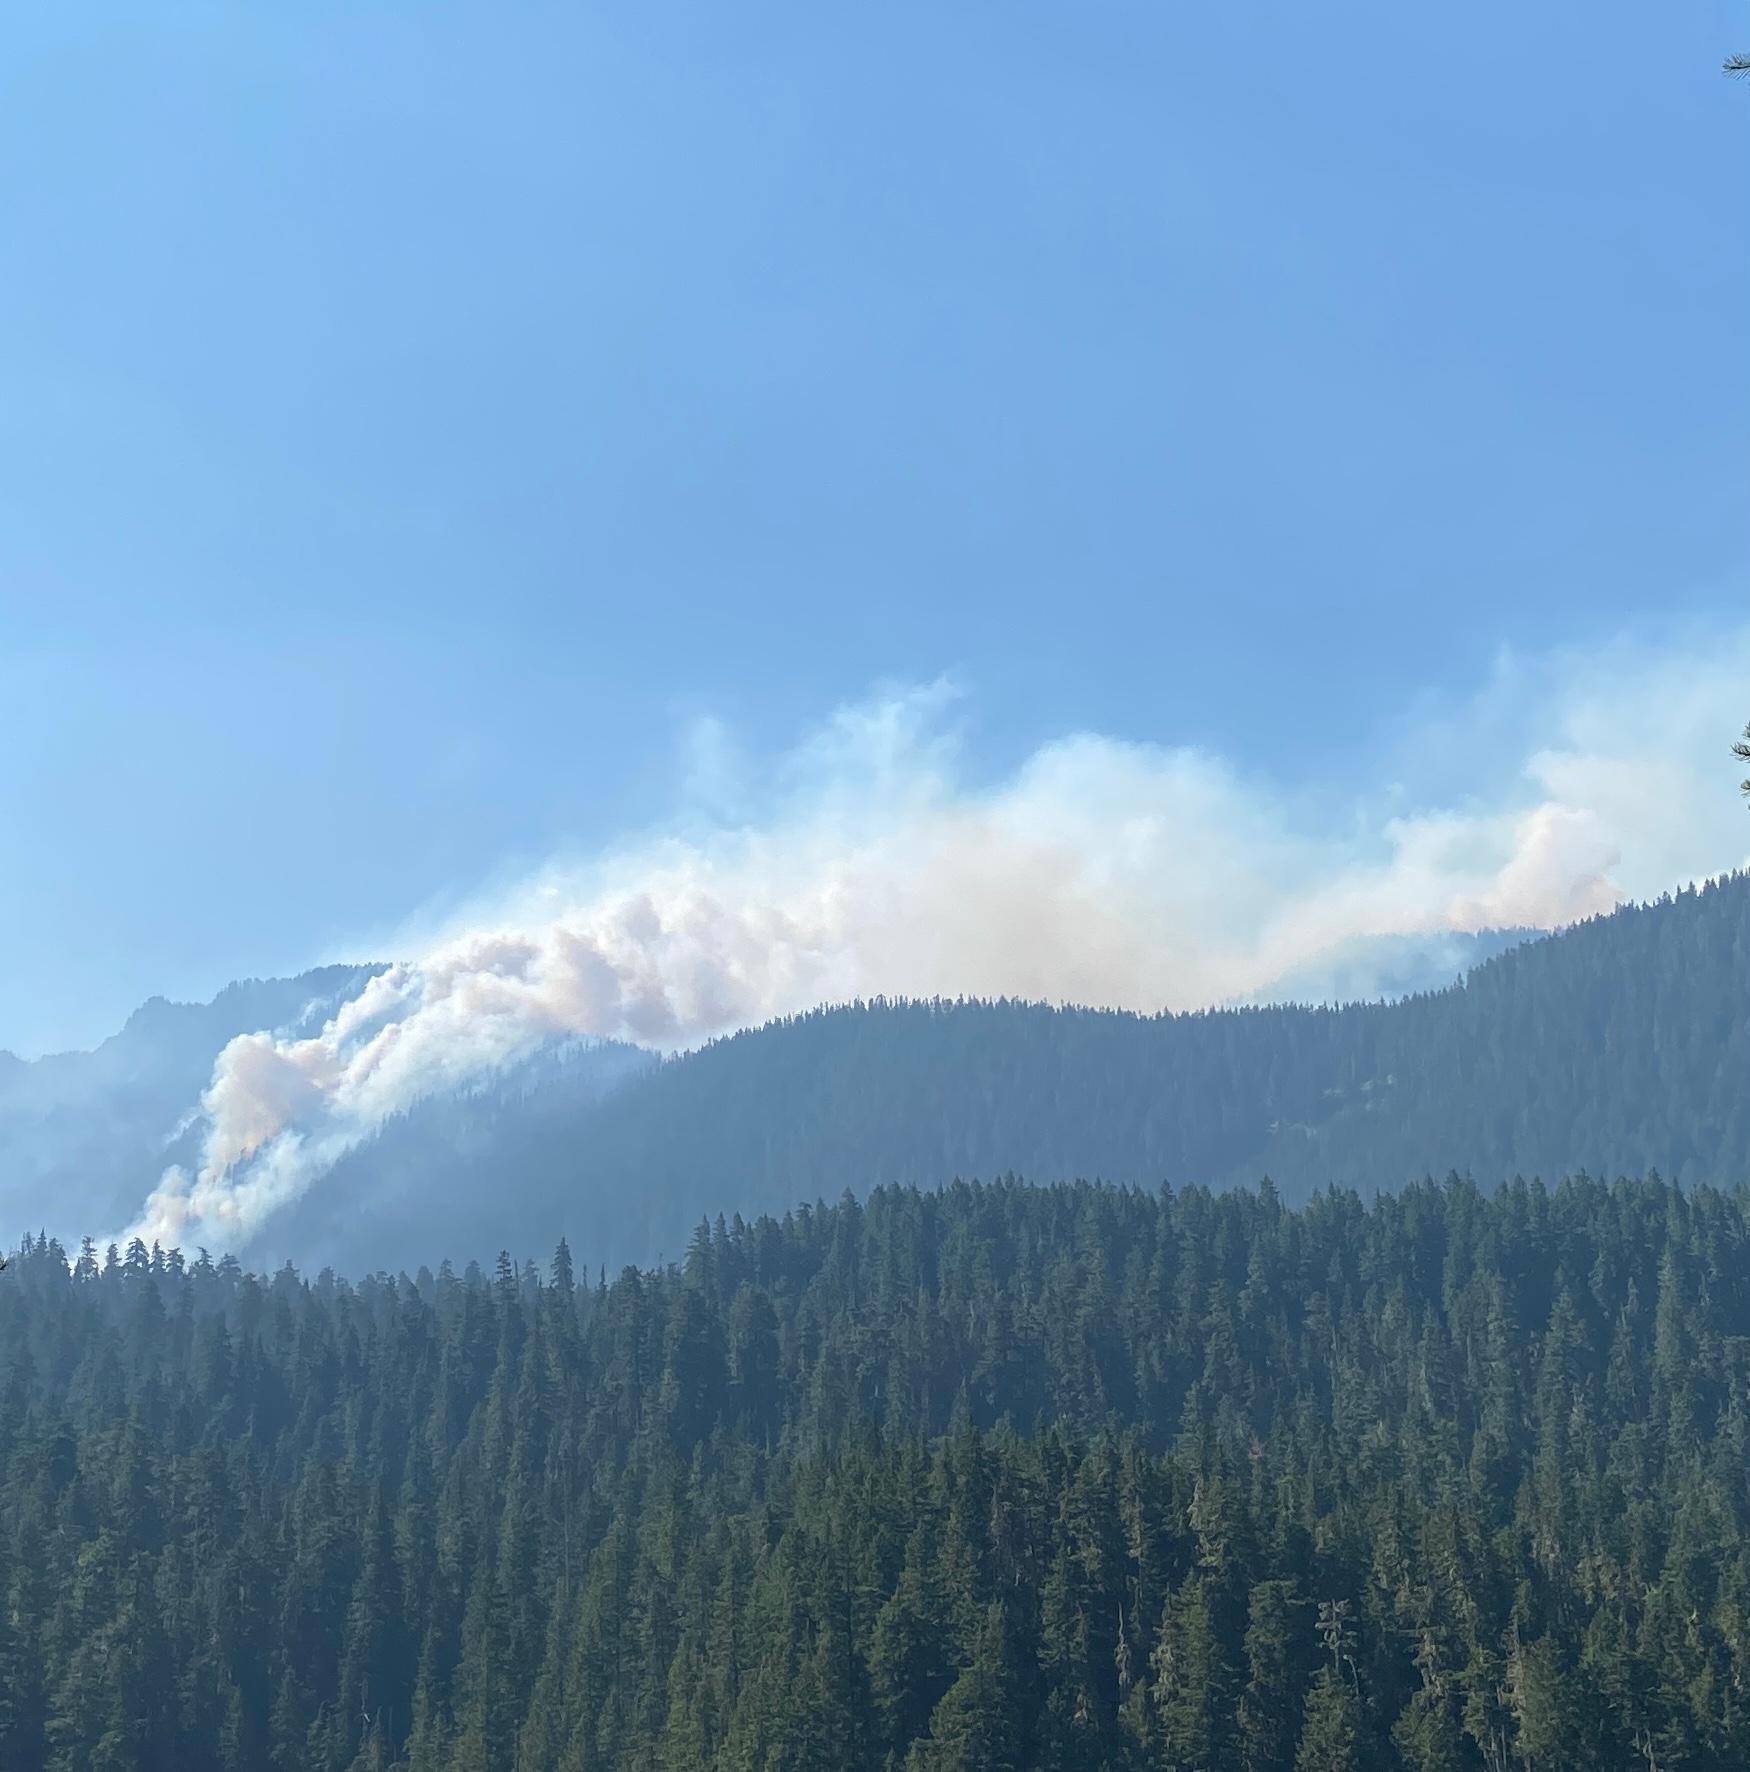 A large smoke plume runs up and over a ridgetop towards Dan creek. The smoke is white, gray, and thick and is boiling up before being blown over the ridge top. The photo is taken from across the Clear Fork of the Cowlitz River.